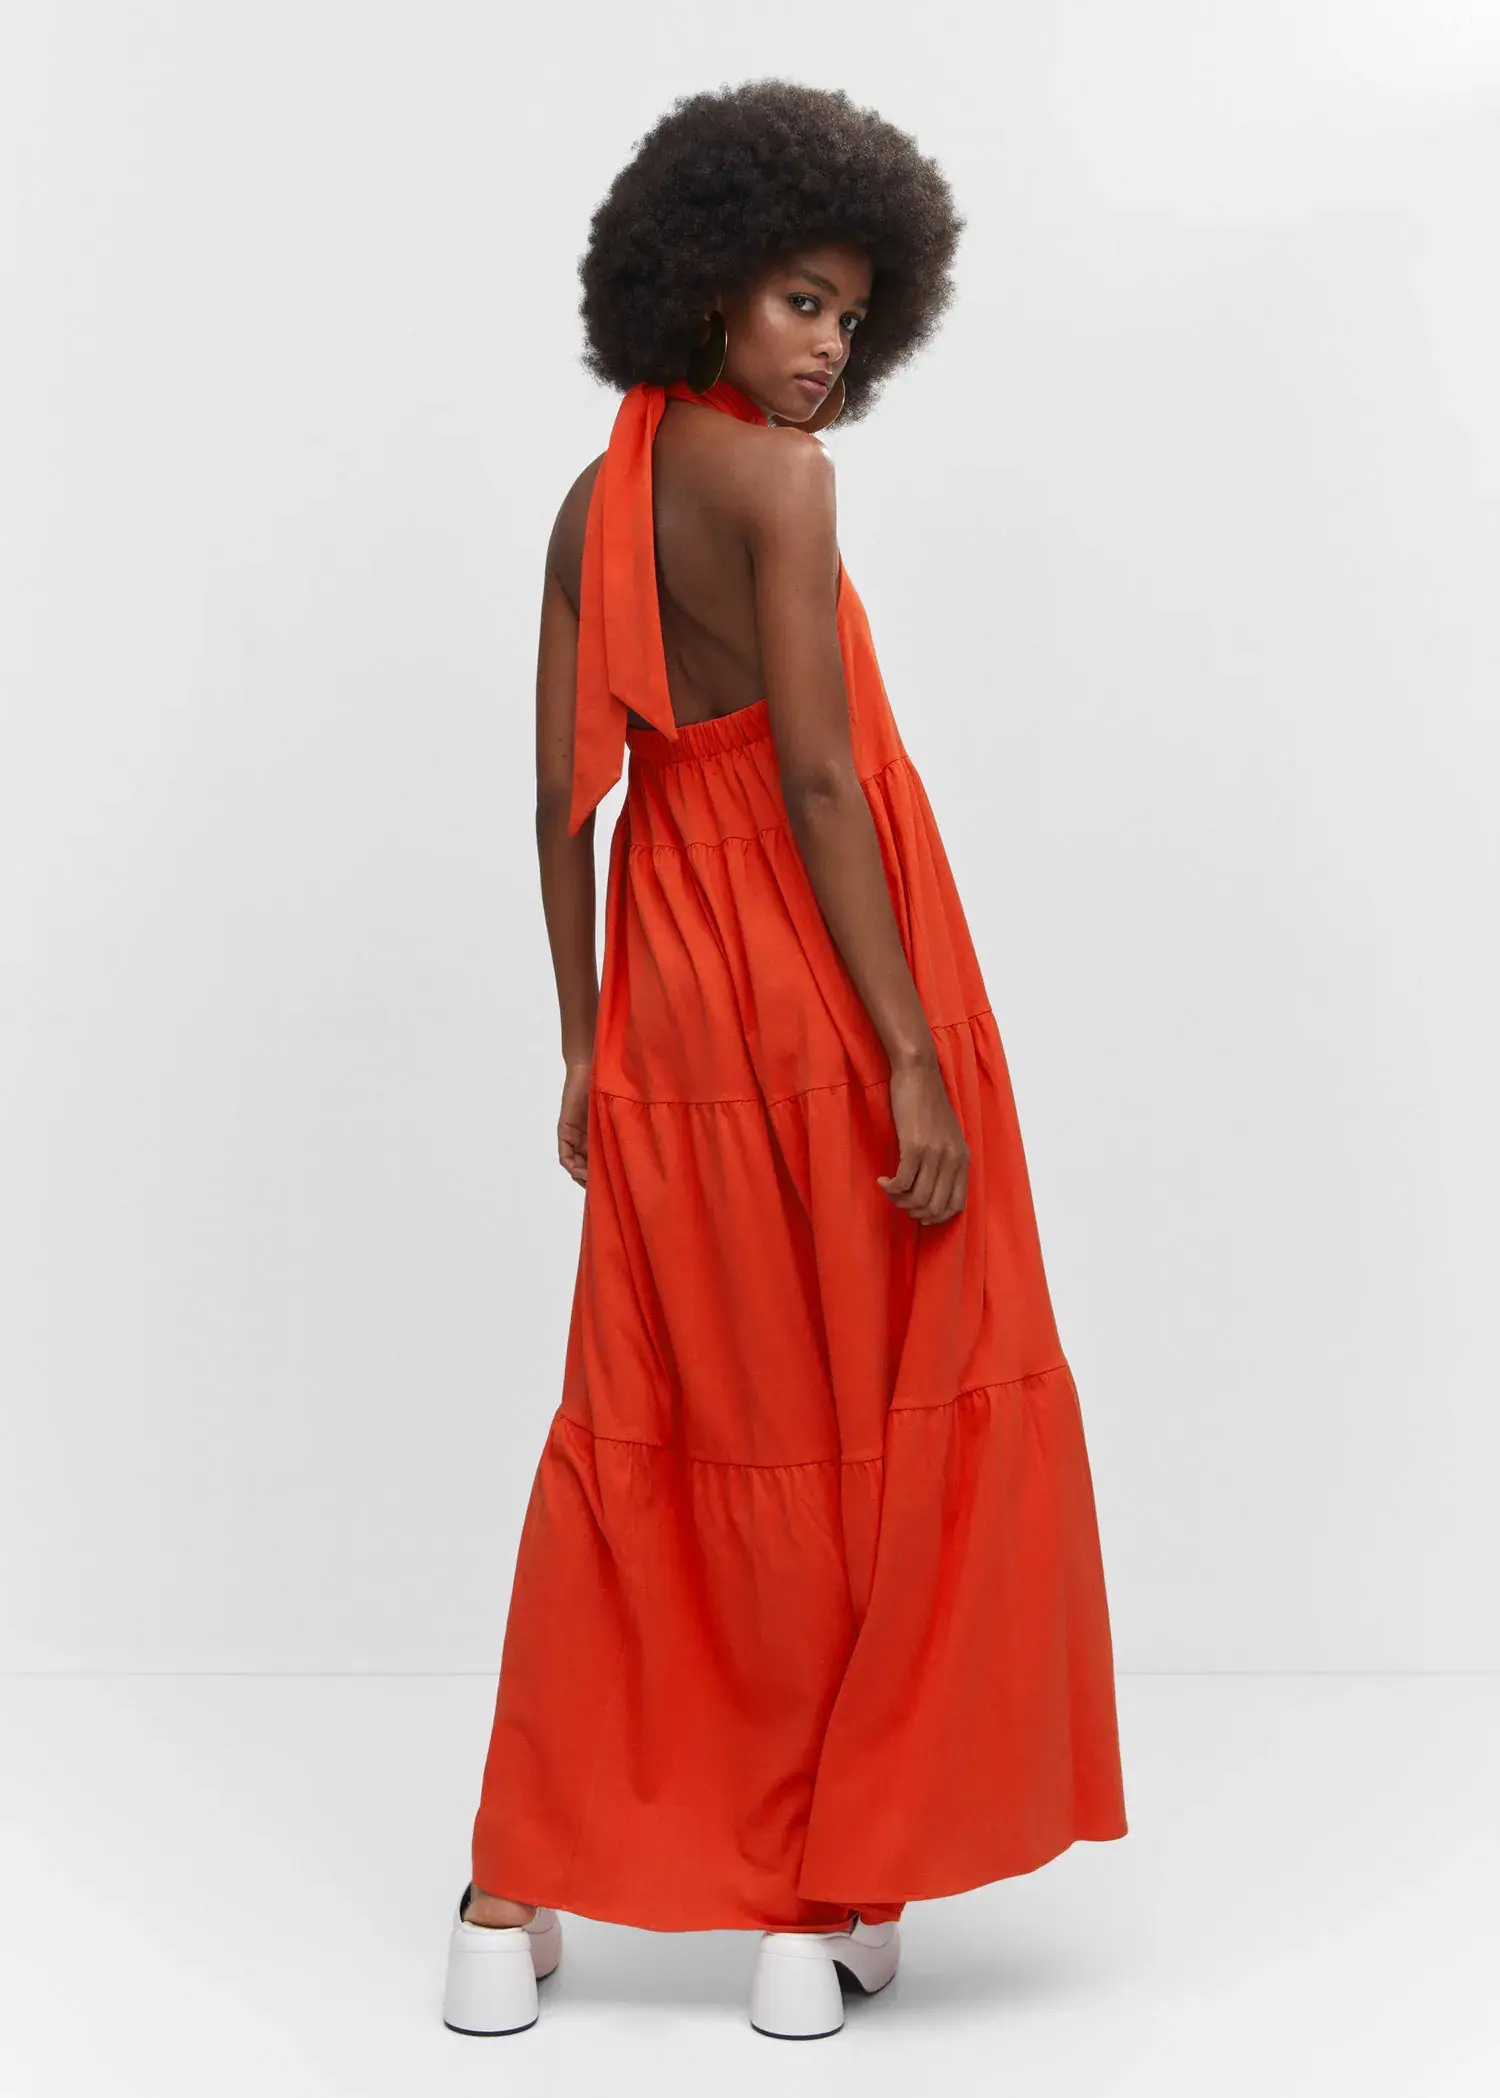 Mango Halter-neck open-back dress. a woman in an orange dress standing in front of a white wall. 